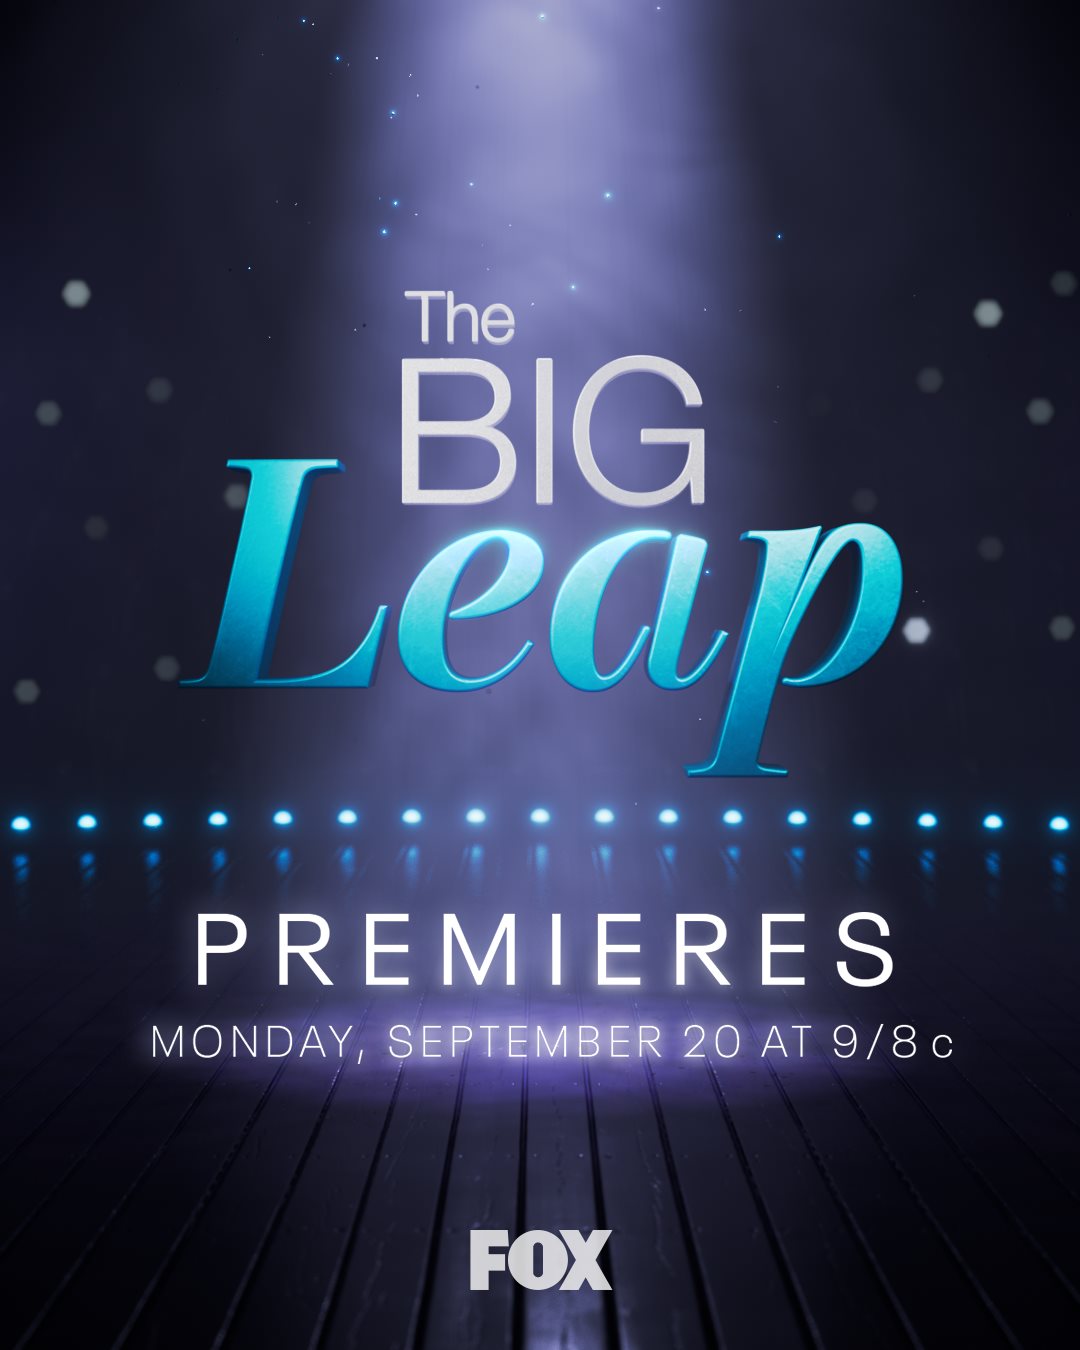 cast of the big leap